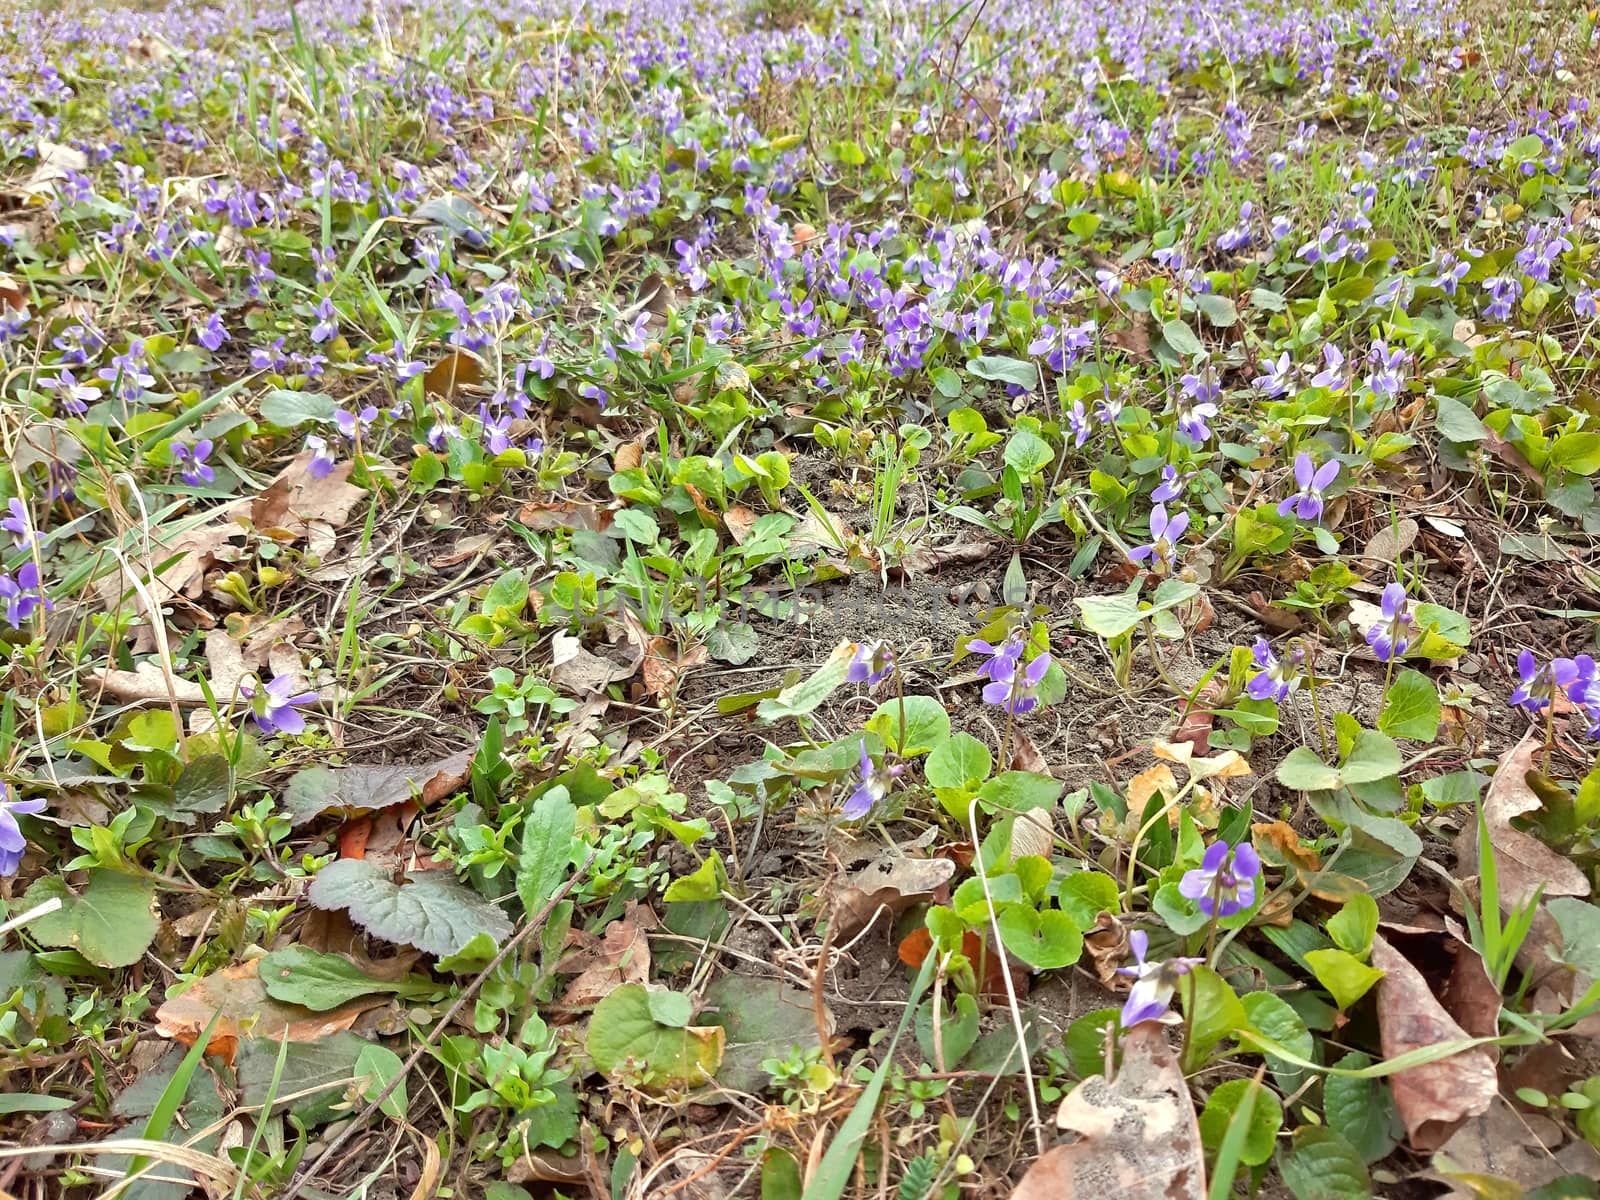 Carpet of violets blooming in the spring and with a strong smell.